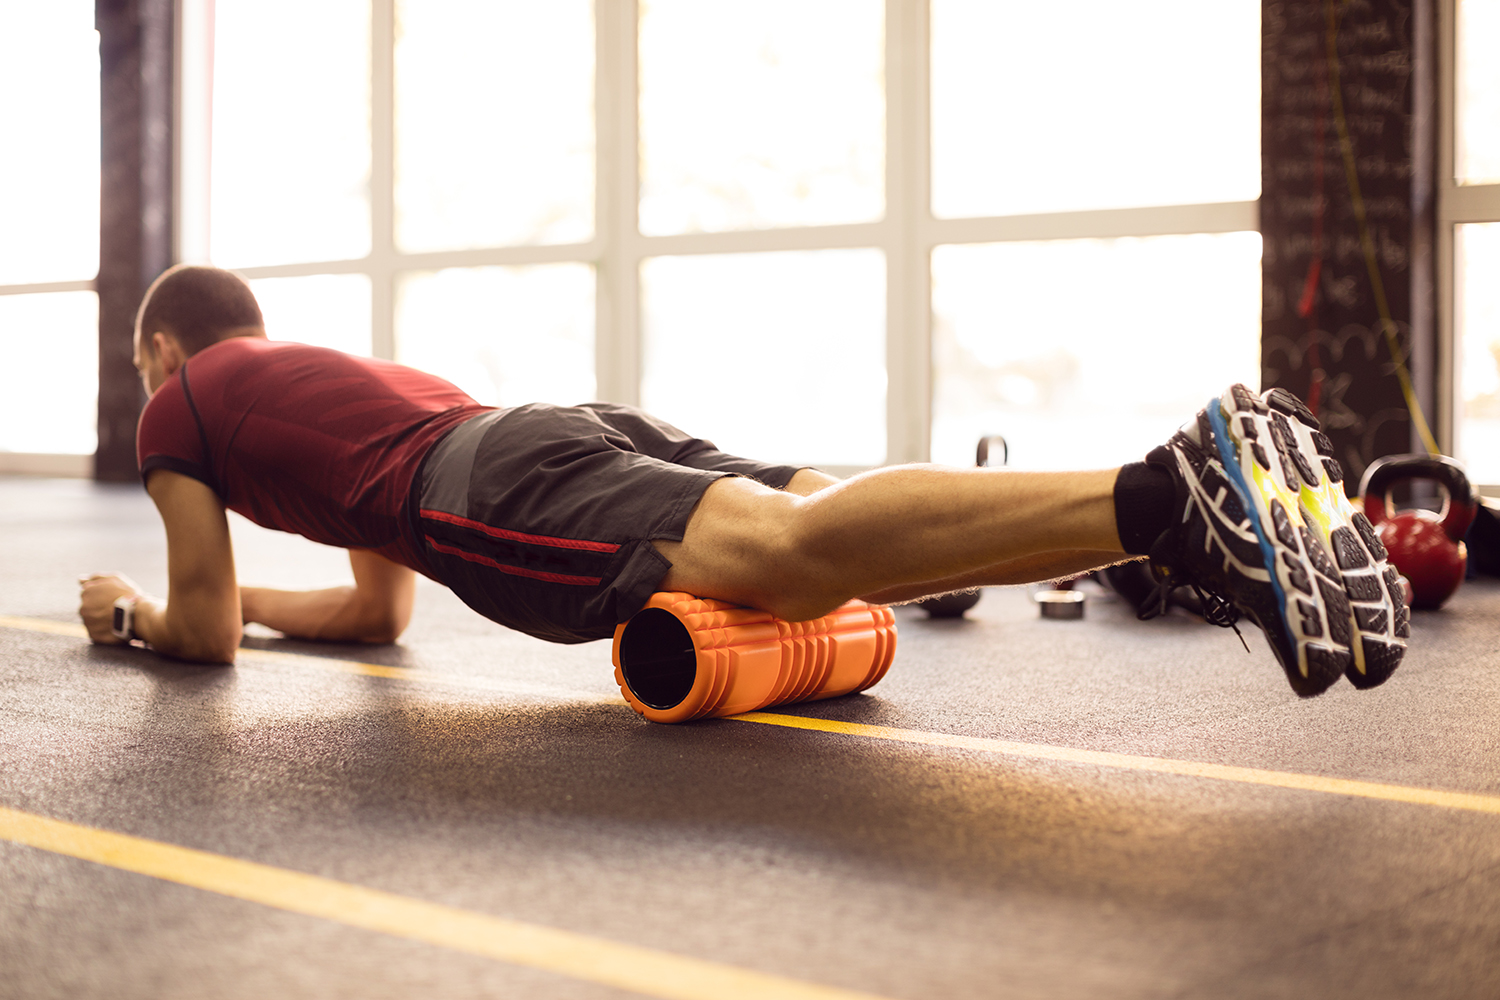 How to Use a Vibrating Foam Roller Like Tom Brady - The Manual